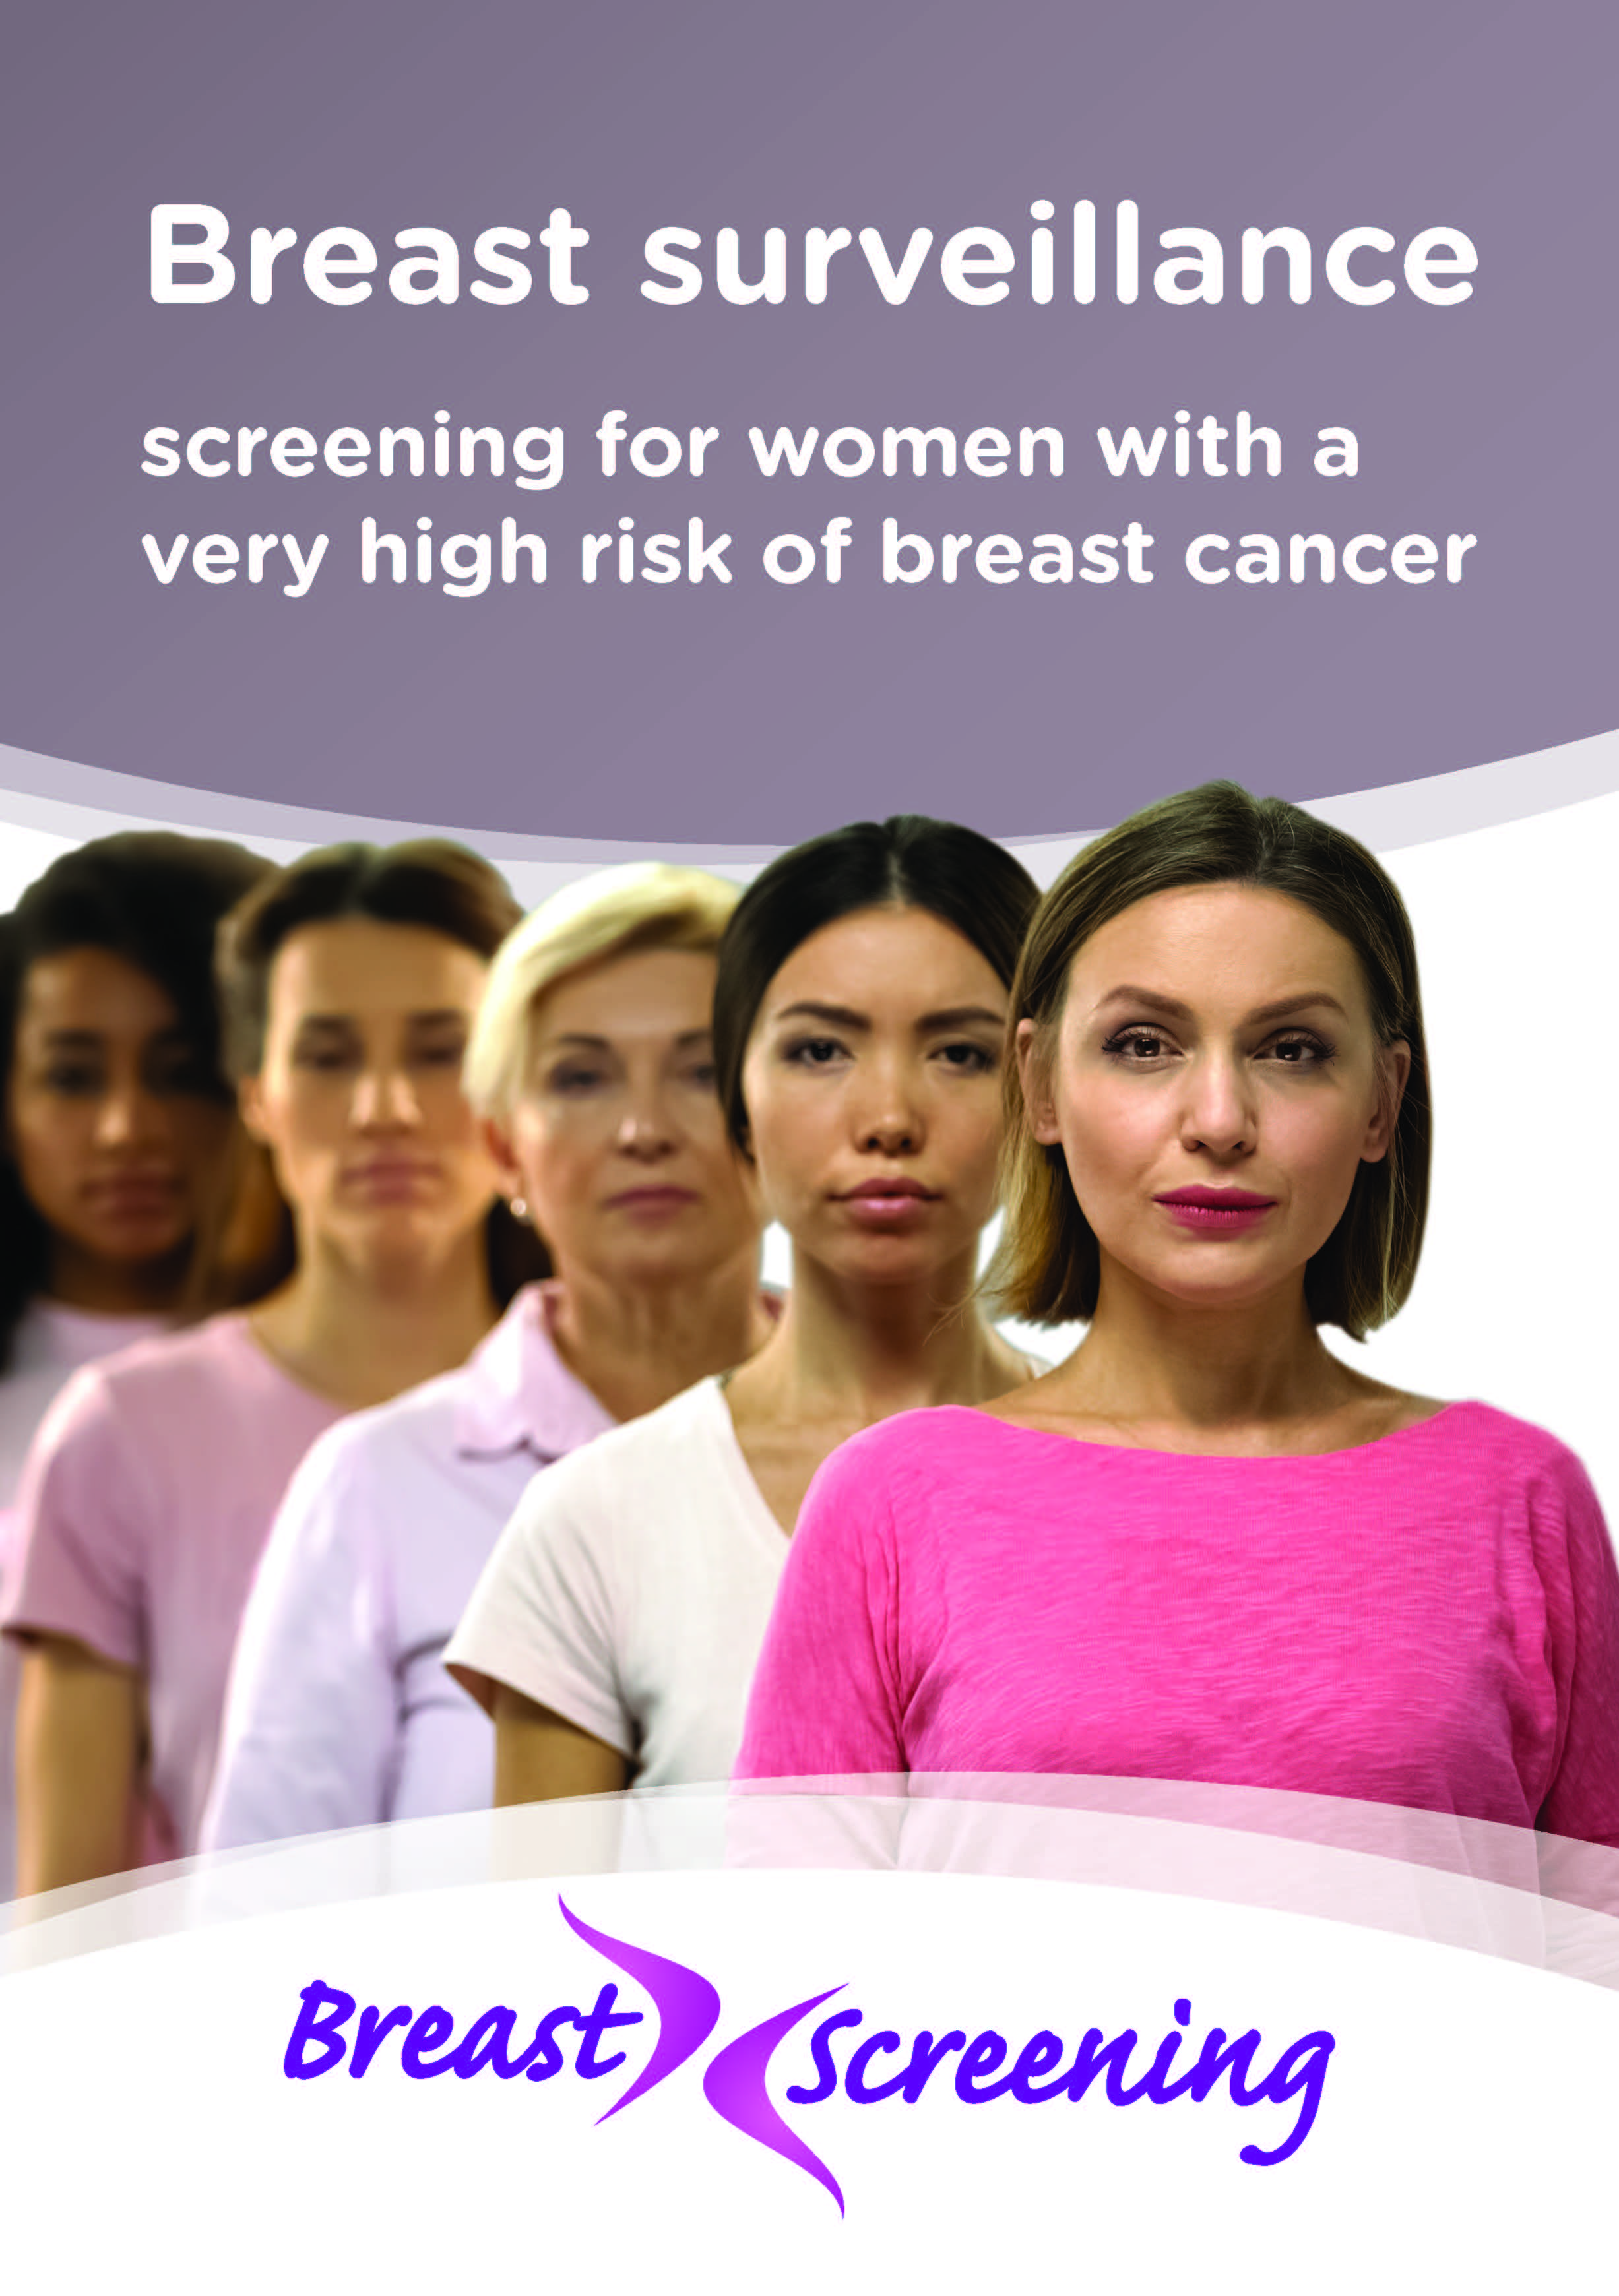 Cover of leaflet for women with a very high risk of breast cancer